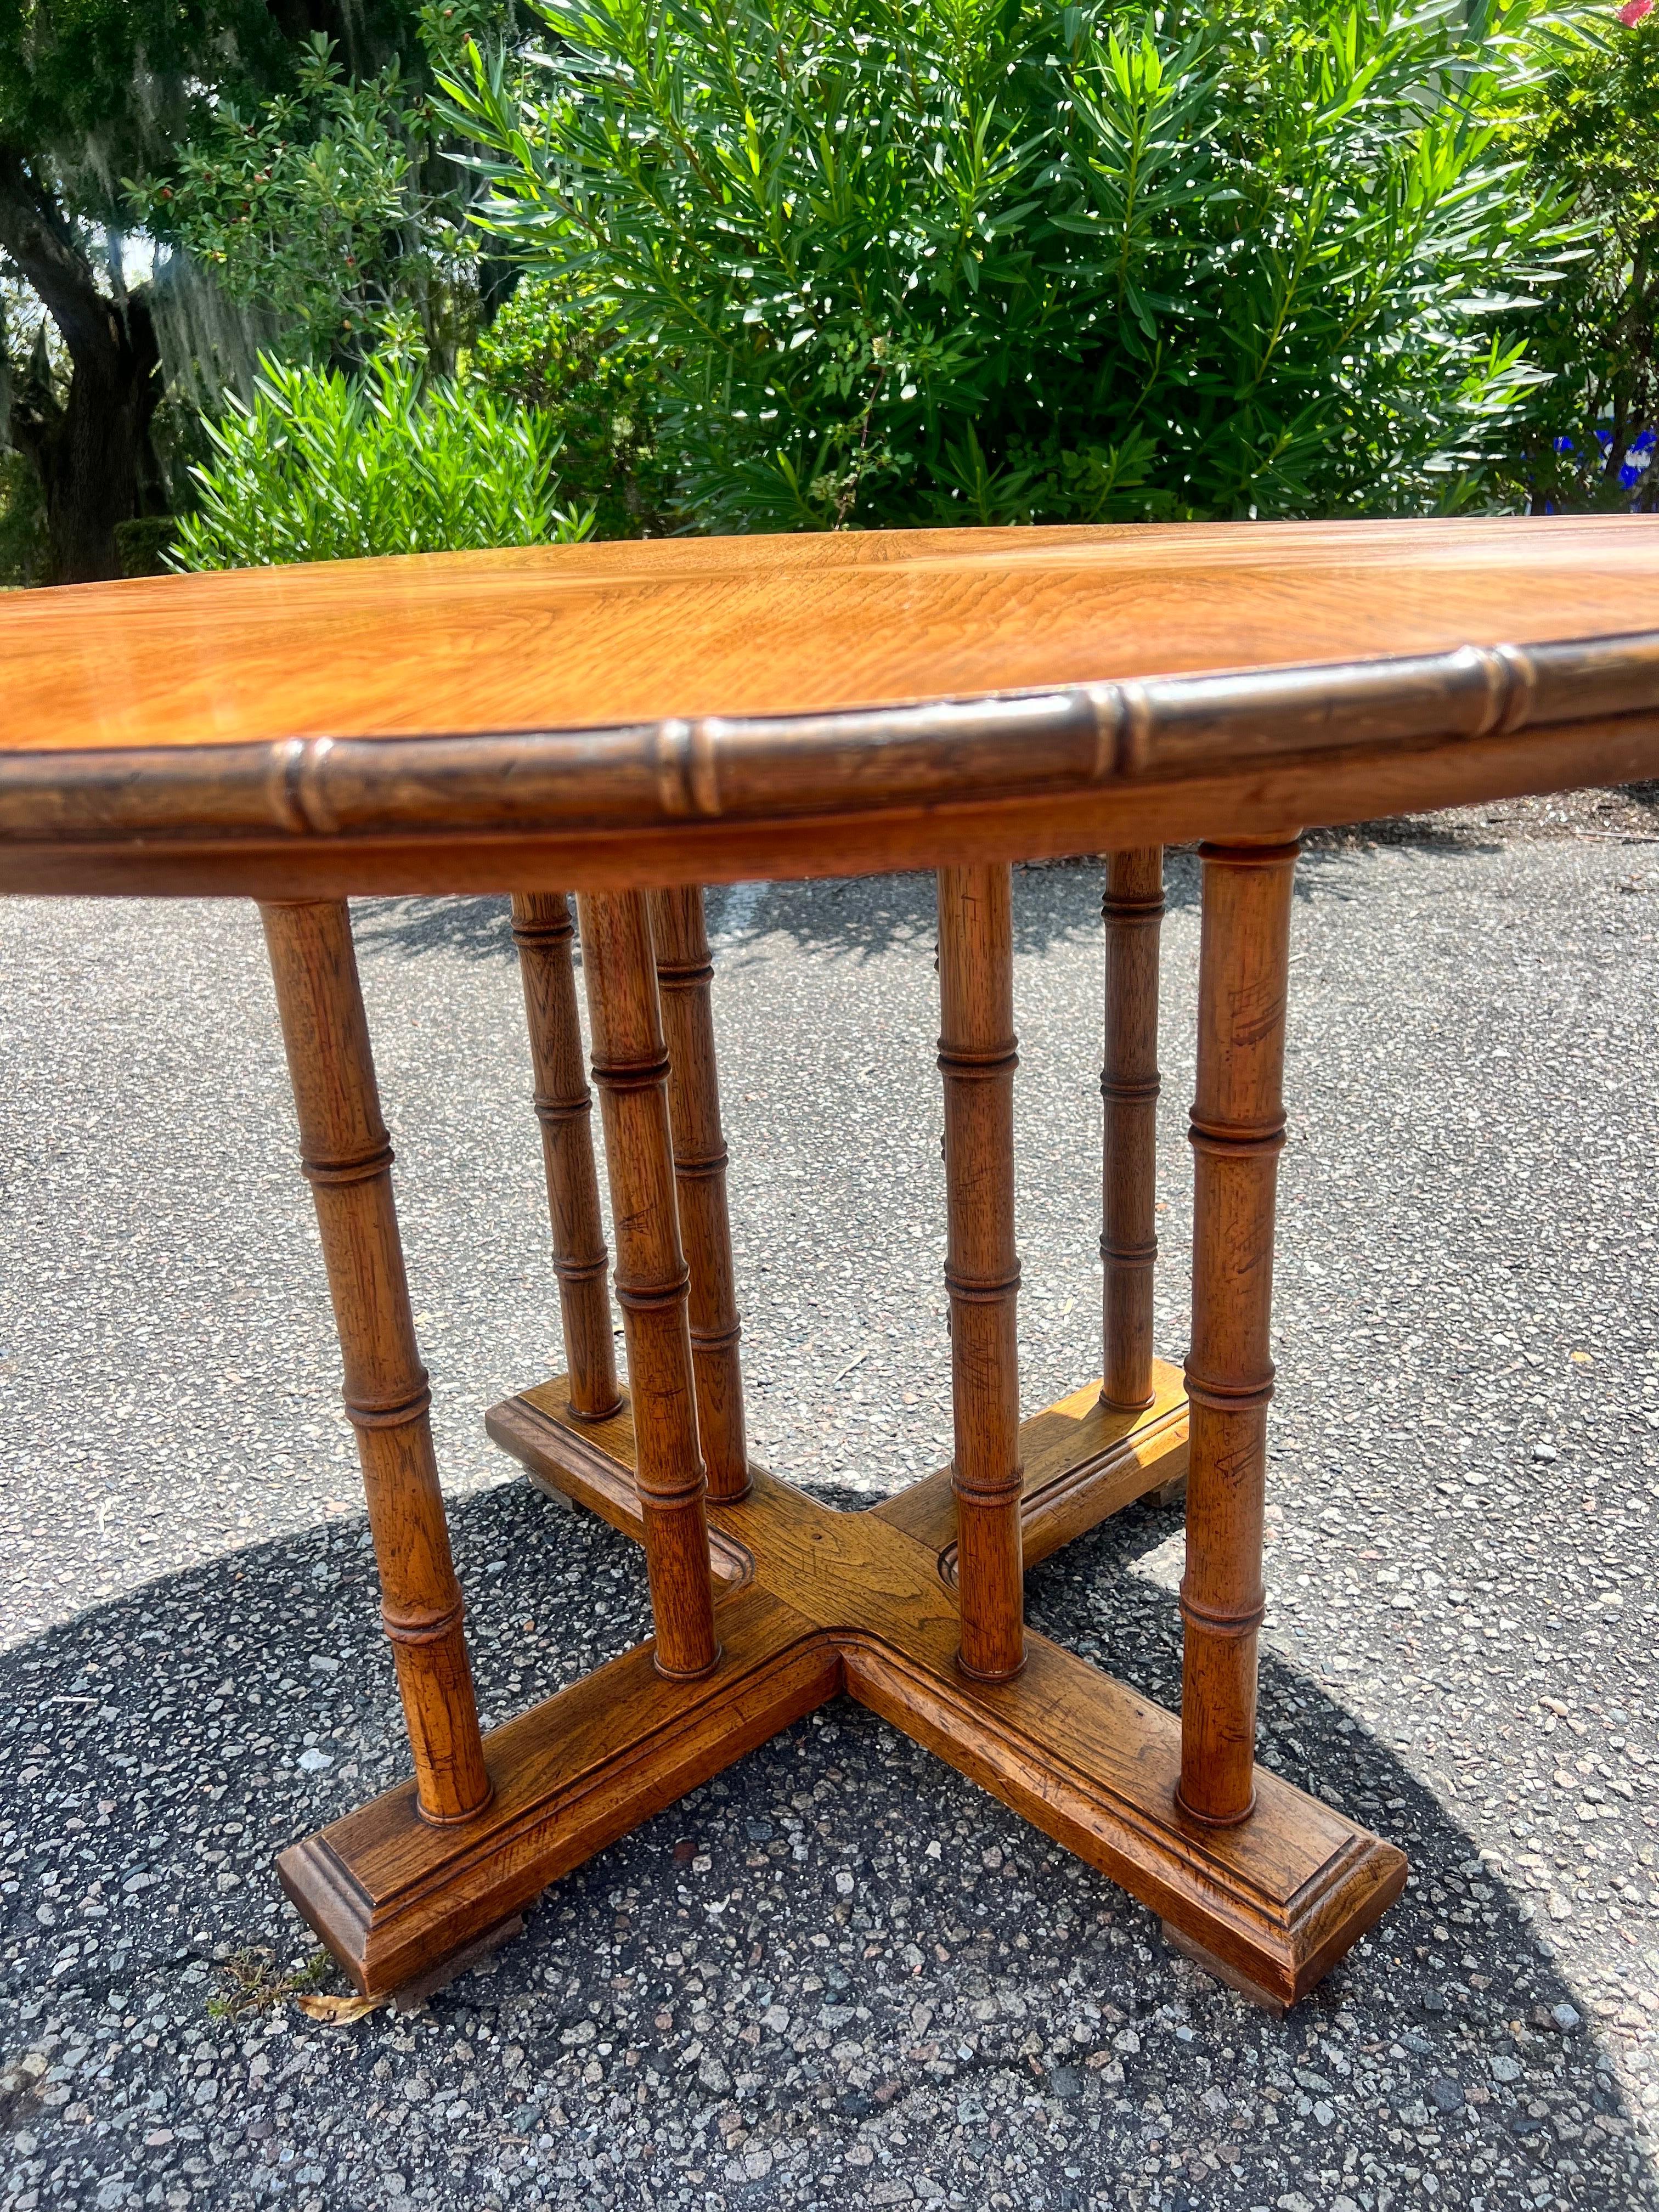 Vintage 1960’s pedestal base table with 2 faux bamboo spindles connecting the 4 feet to the table top totaling 8.    There is also a faux carved wood bamboo band around the table top.   The top has a very nice pie wood grain.